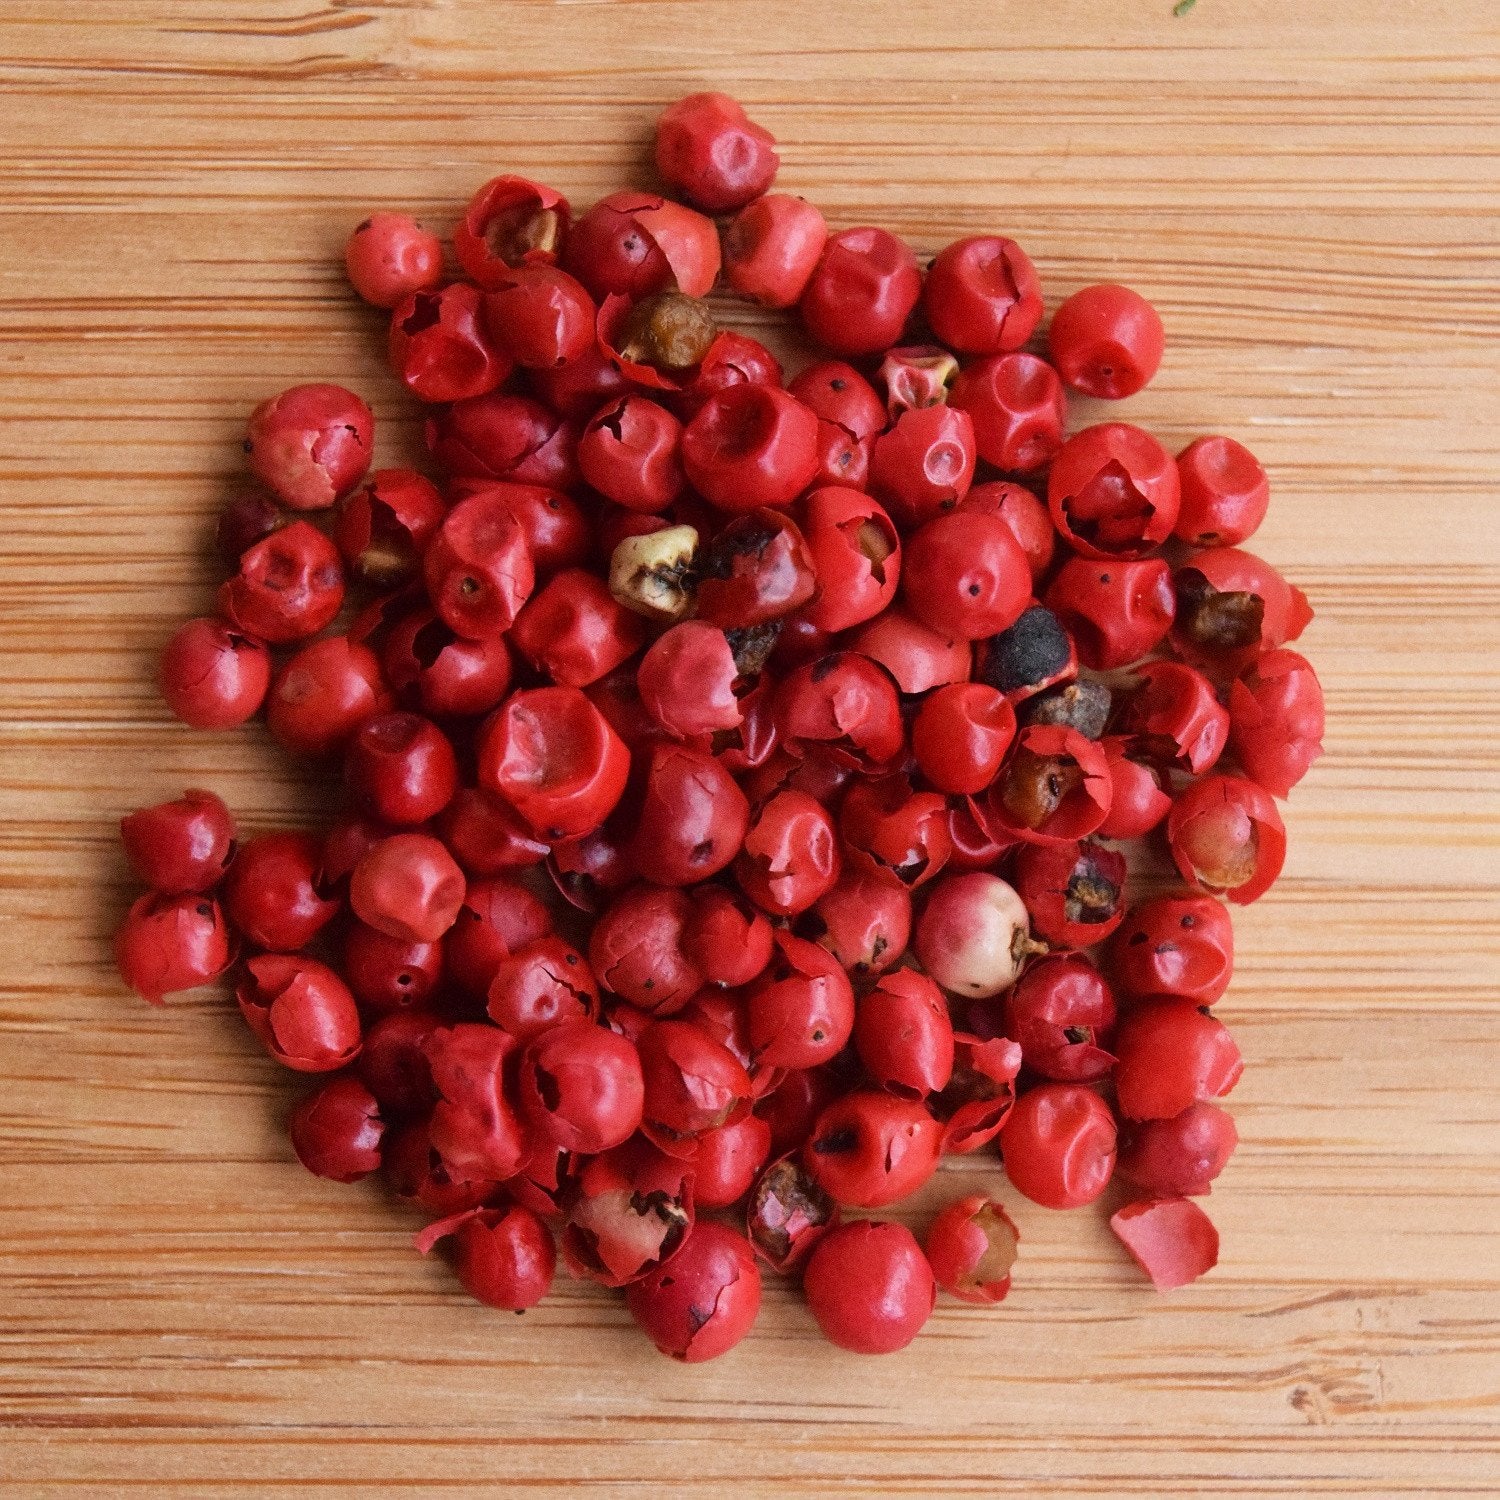 Pink Peppercorn, Whole Pink Peppercorns, Loose Whole Peppercorns